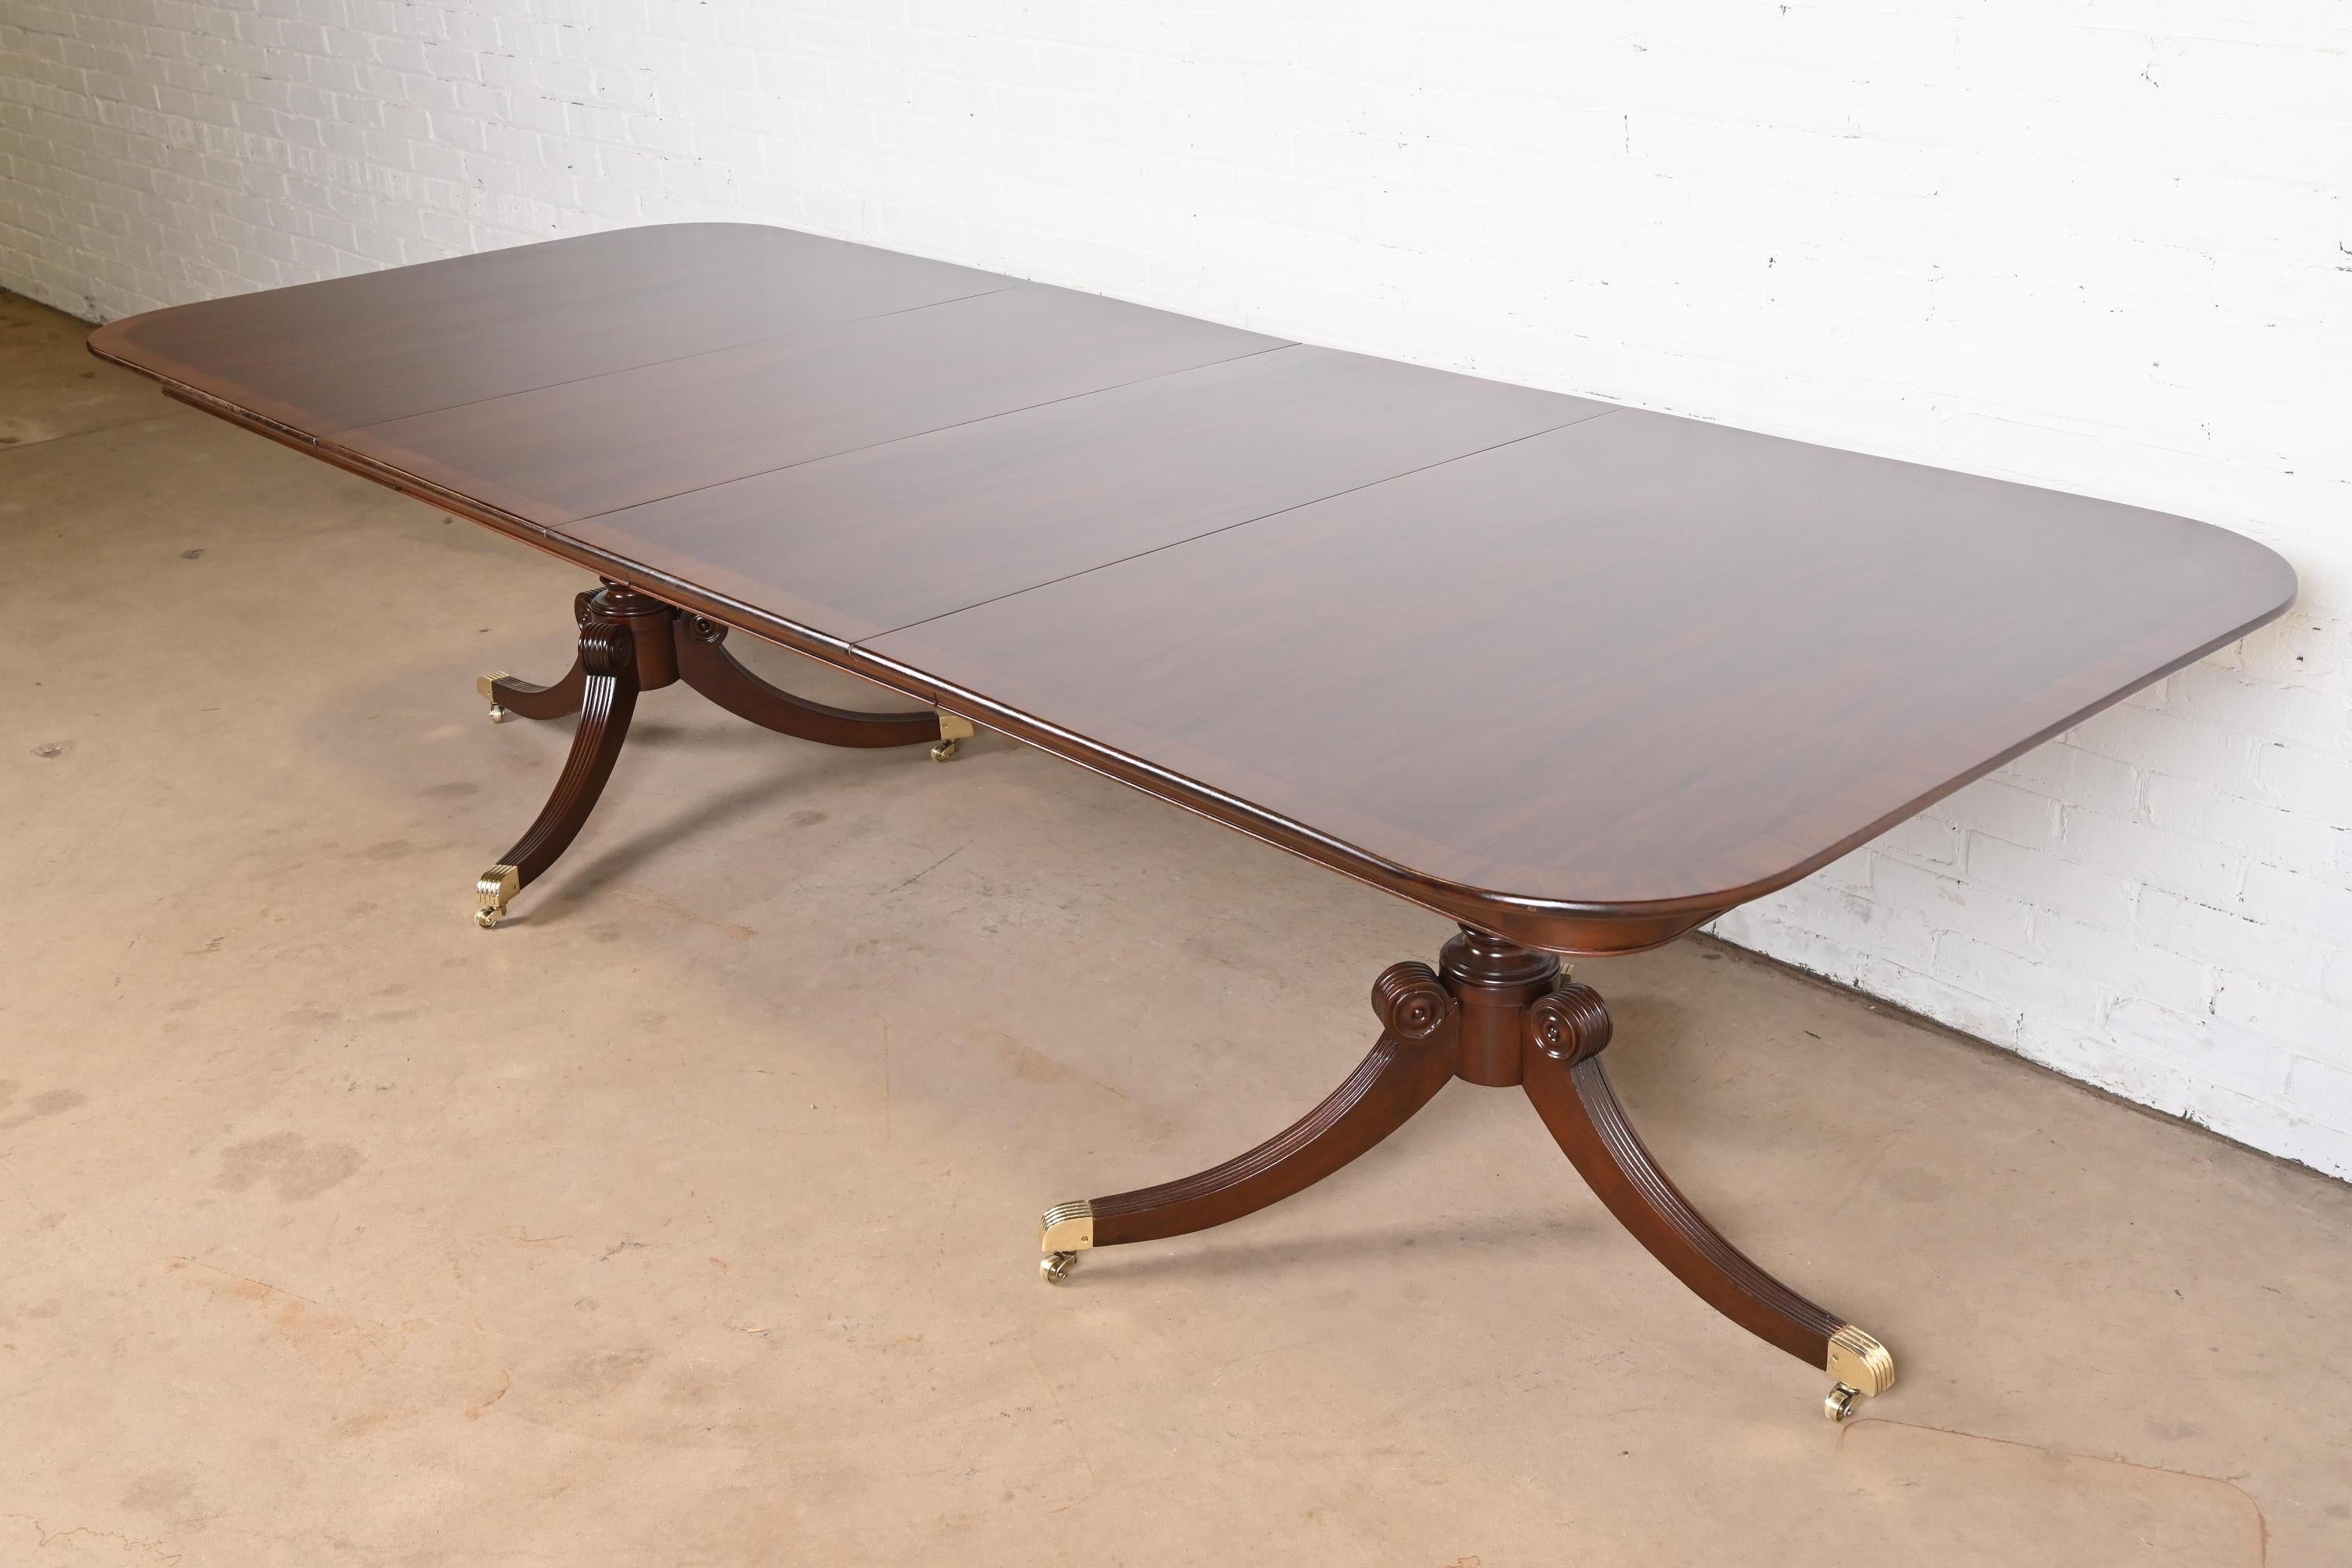 A gorgeous Georgian or Regency style double pedestal extension dining table

In the manner of Baker Furniture

USA, Circa 1980s

Beautiful banded mahogany, with carved solid mahogany pedestals, and brass-capped feet on brass casters.

Measures: 68